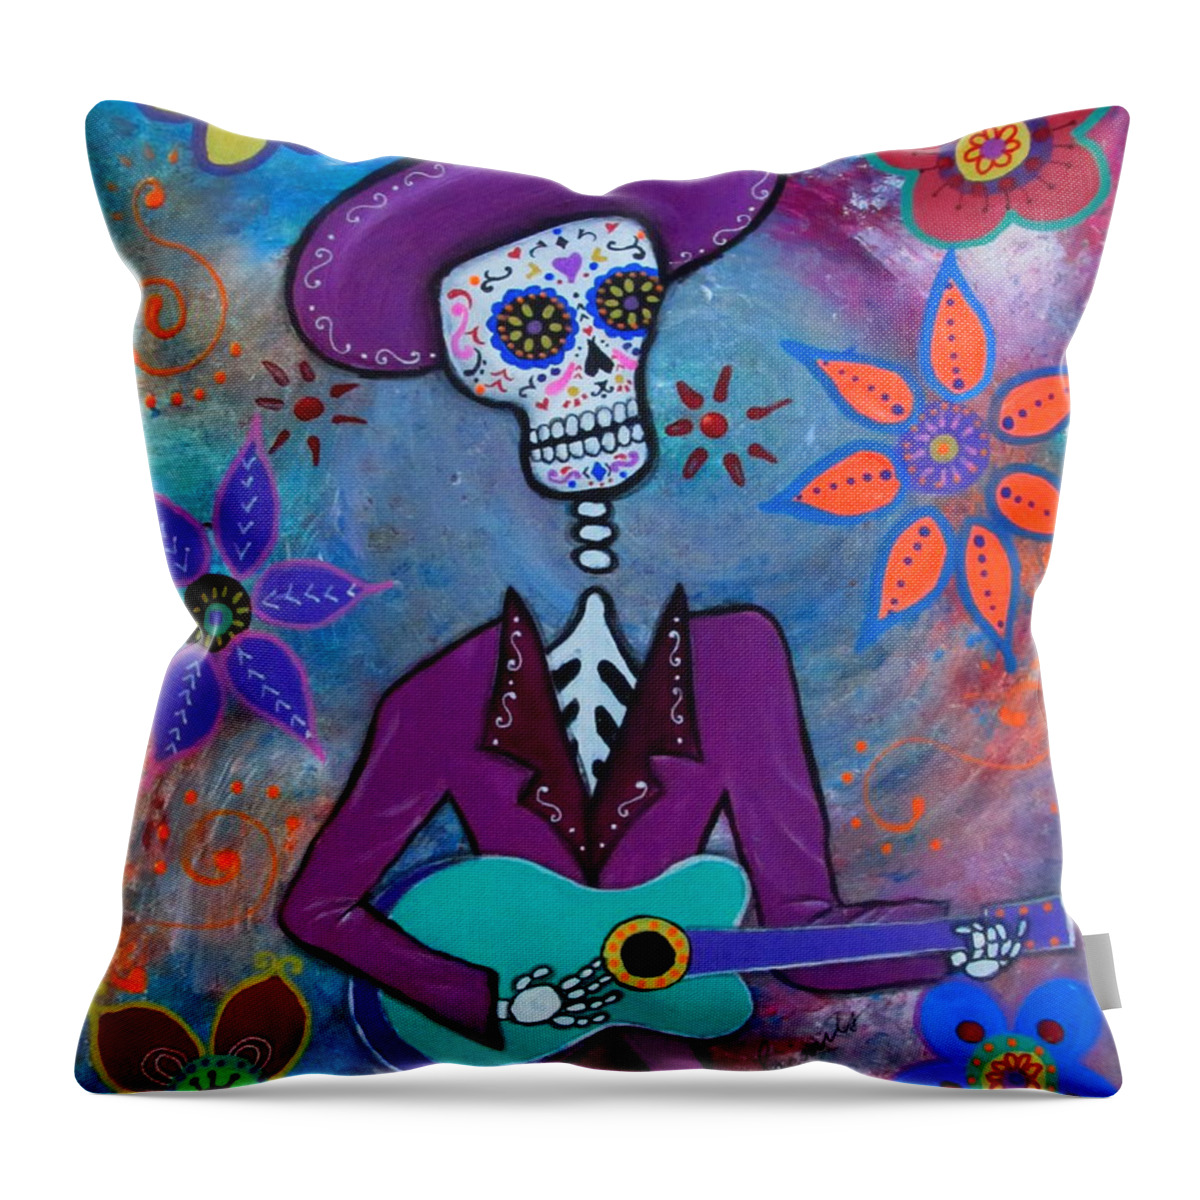 Day Of The Dead Mariachi. Original Painting Available For Sale. Throw Pillow featuring the painting Dia De Los Muertos Mariachi #1 by Pristine Cartera Turkus